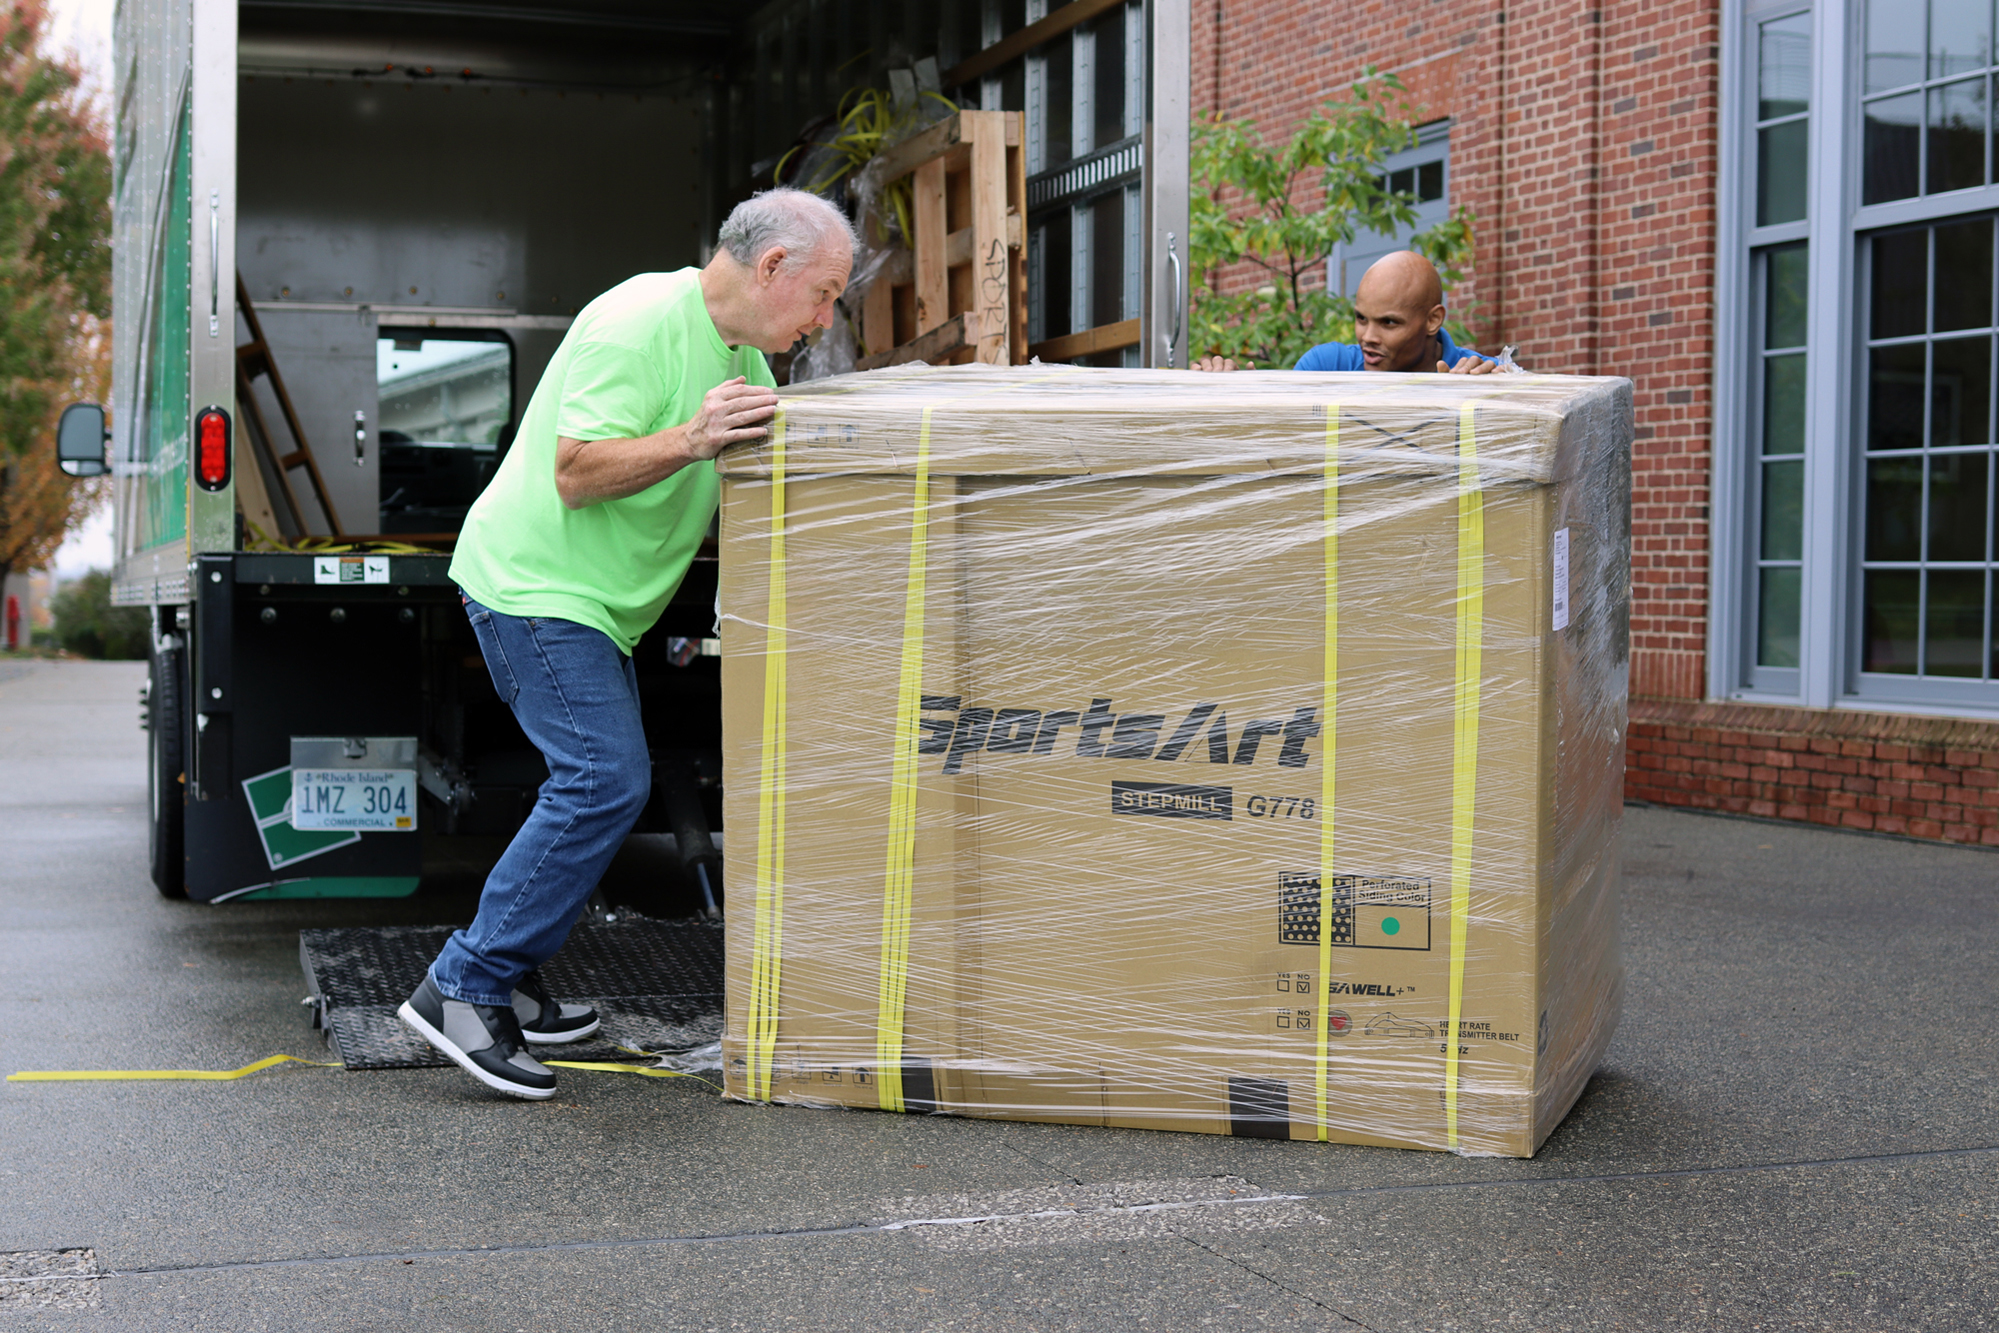 Workers move an equipment box into the gym